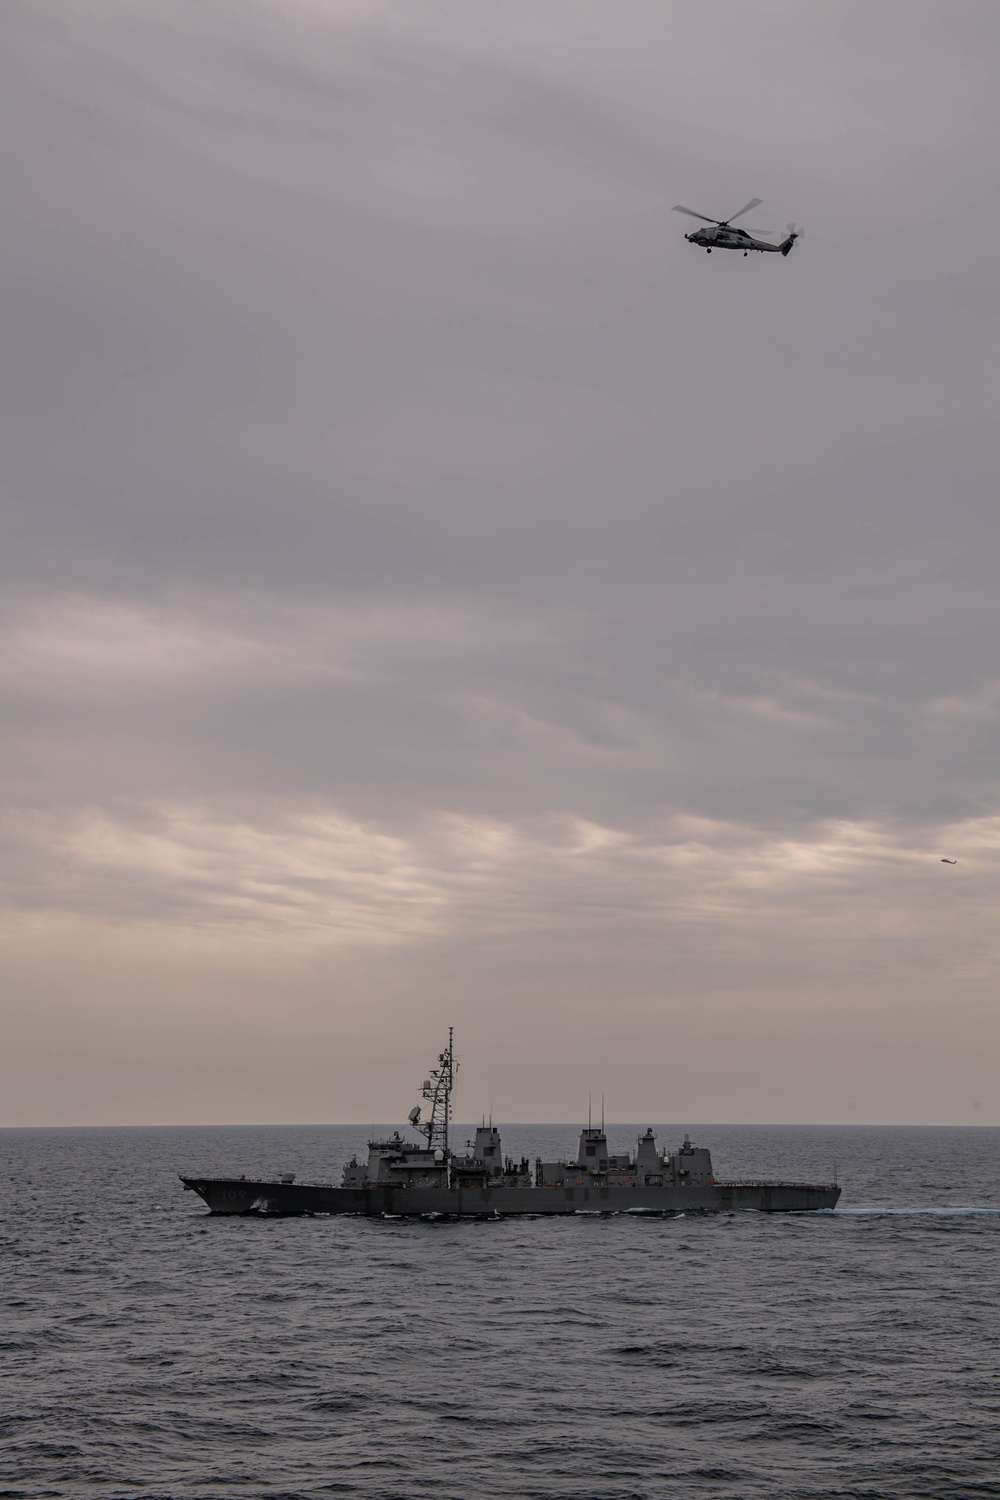 Theodore Roosevelt Carrier Strike Group Trilateral Maritime Exercise